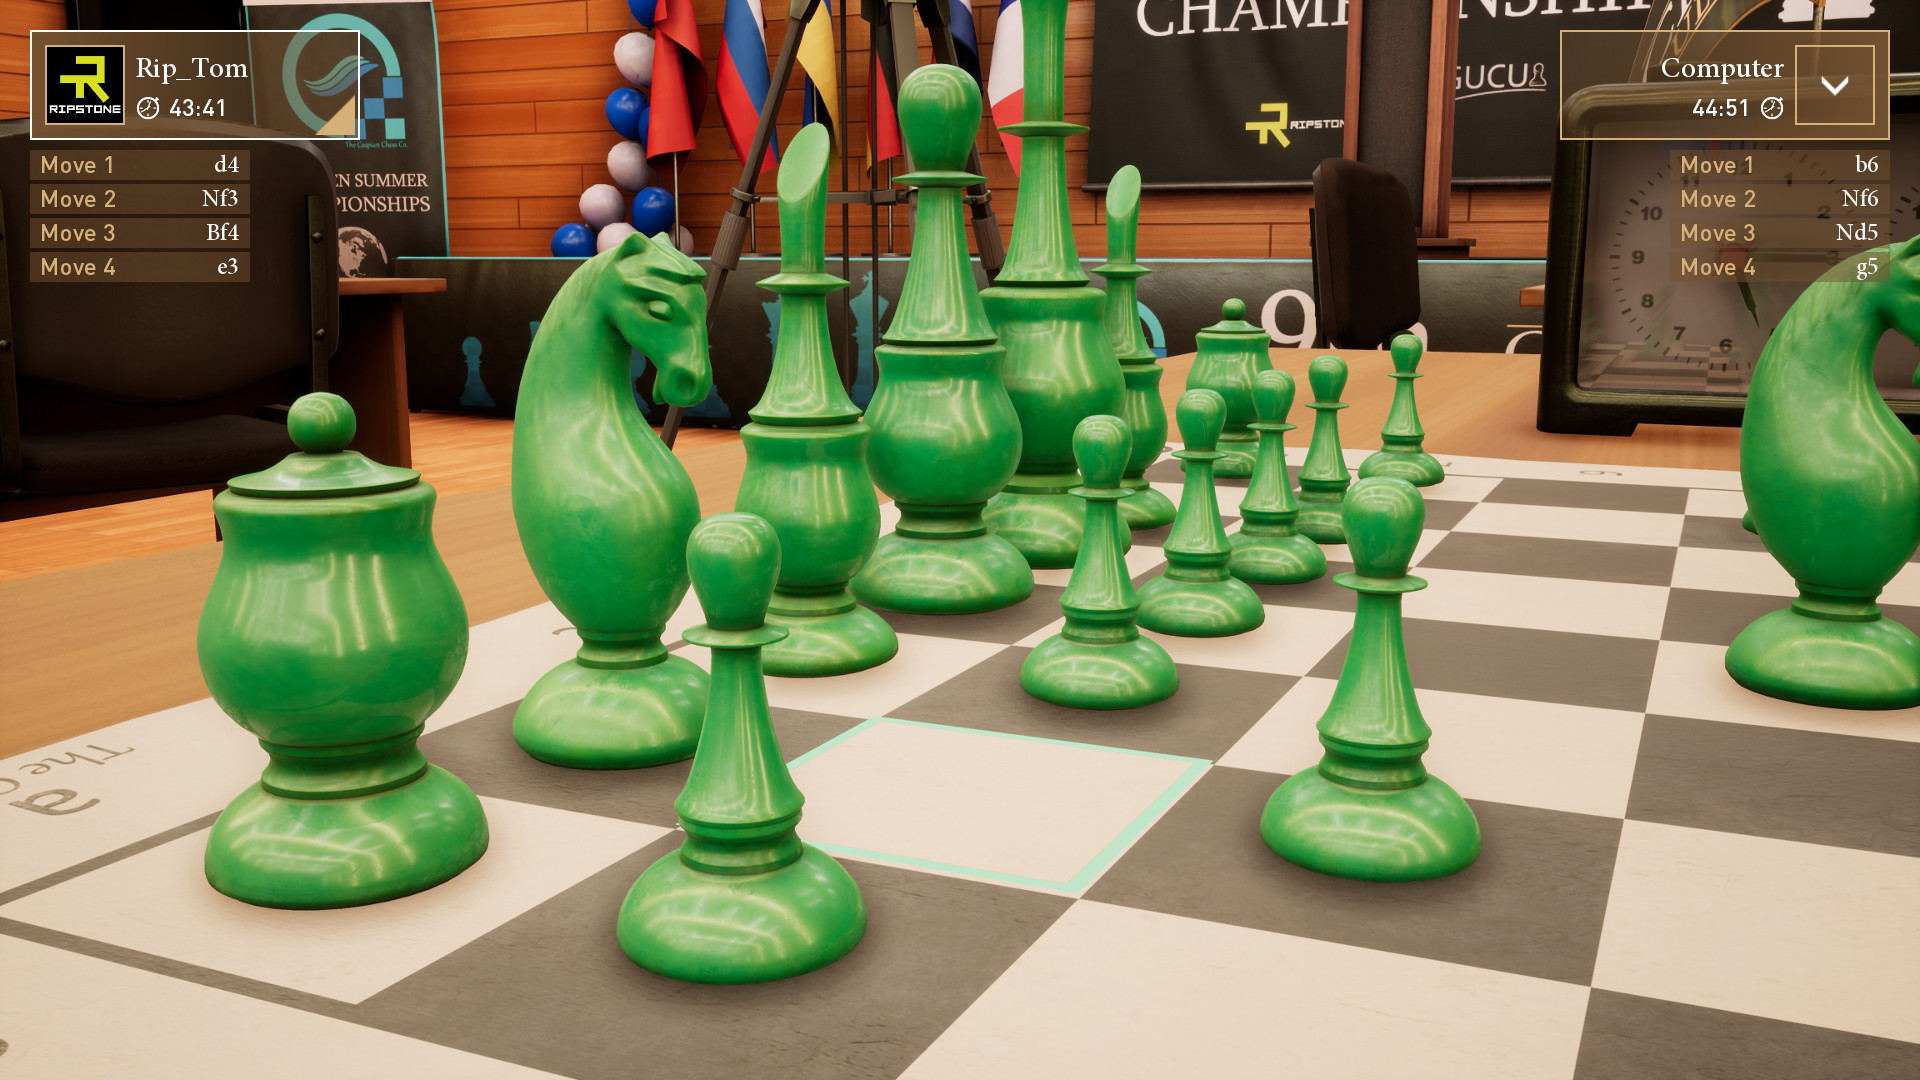 Chess Ultra X Purling London Bold Chess on Steam